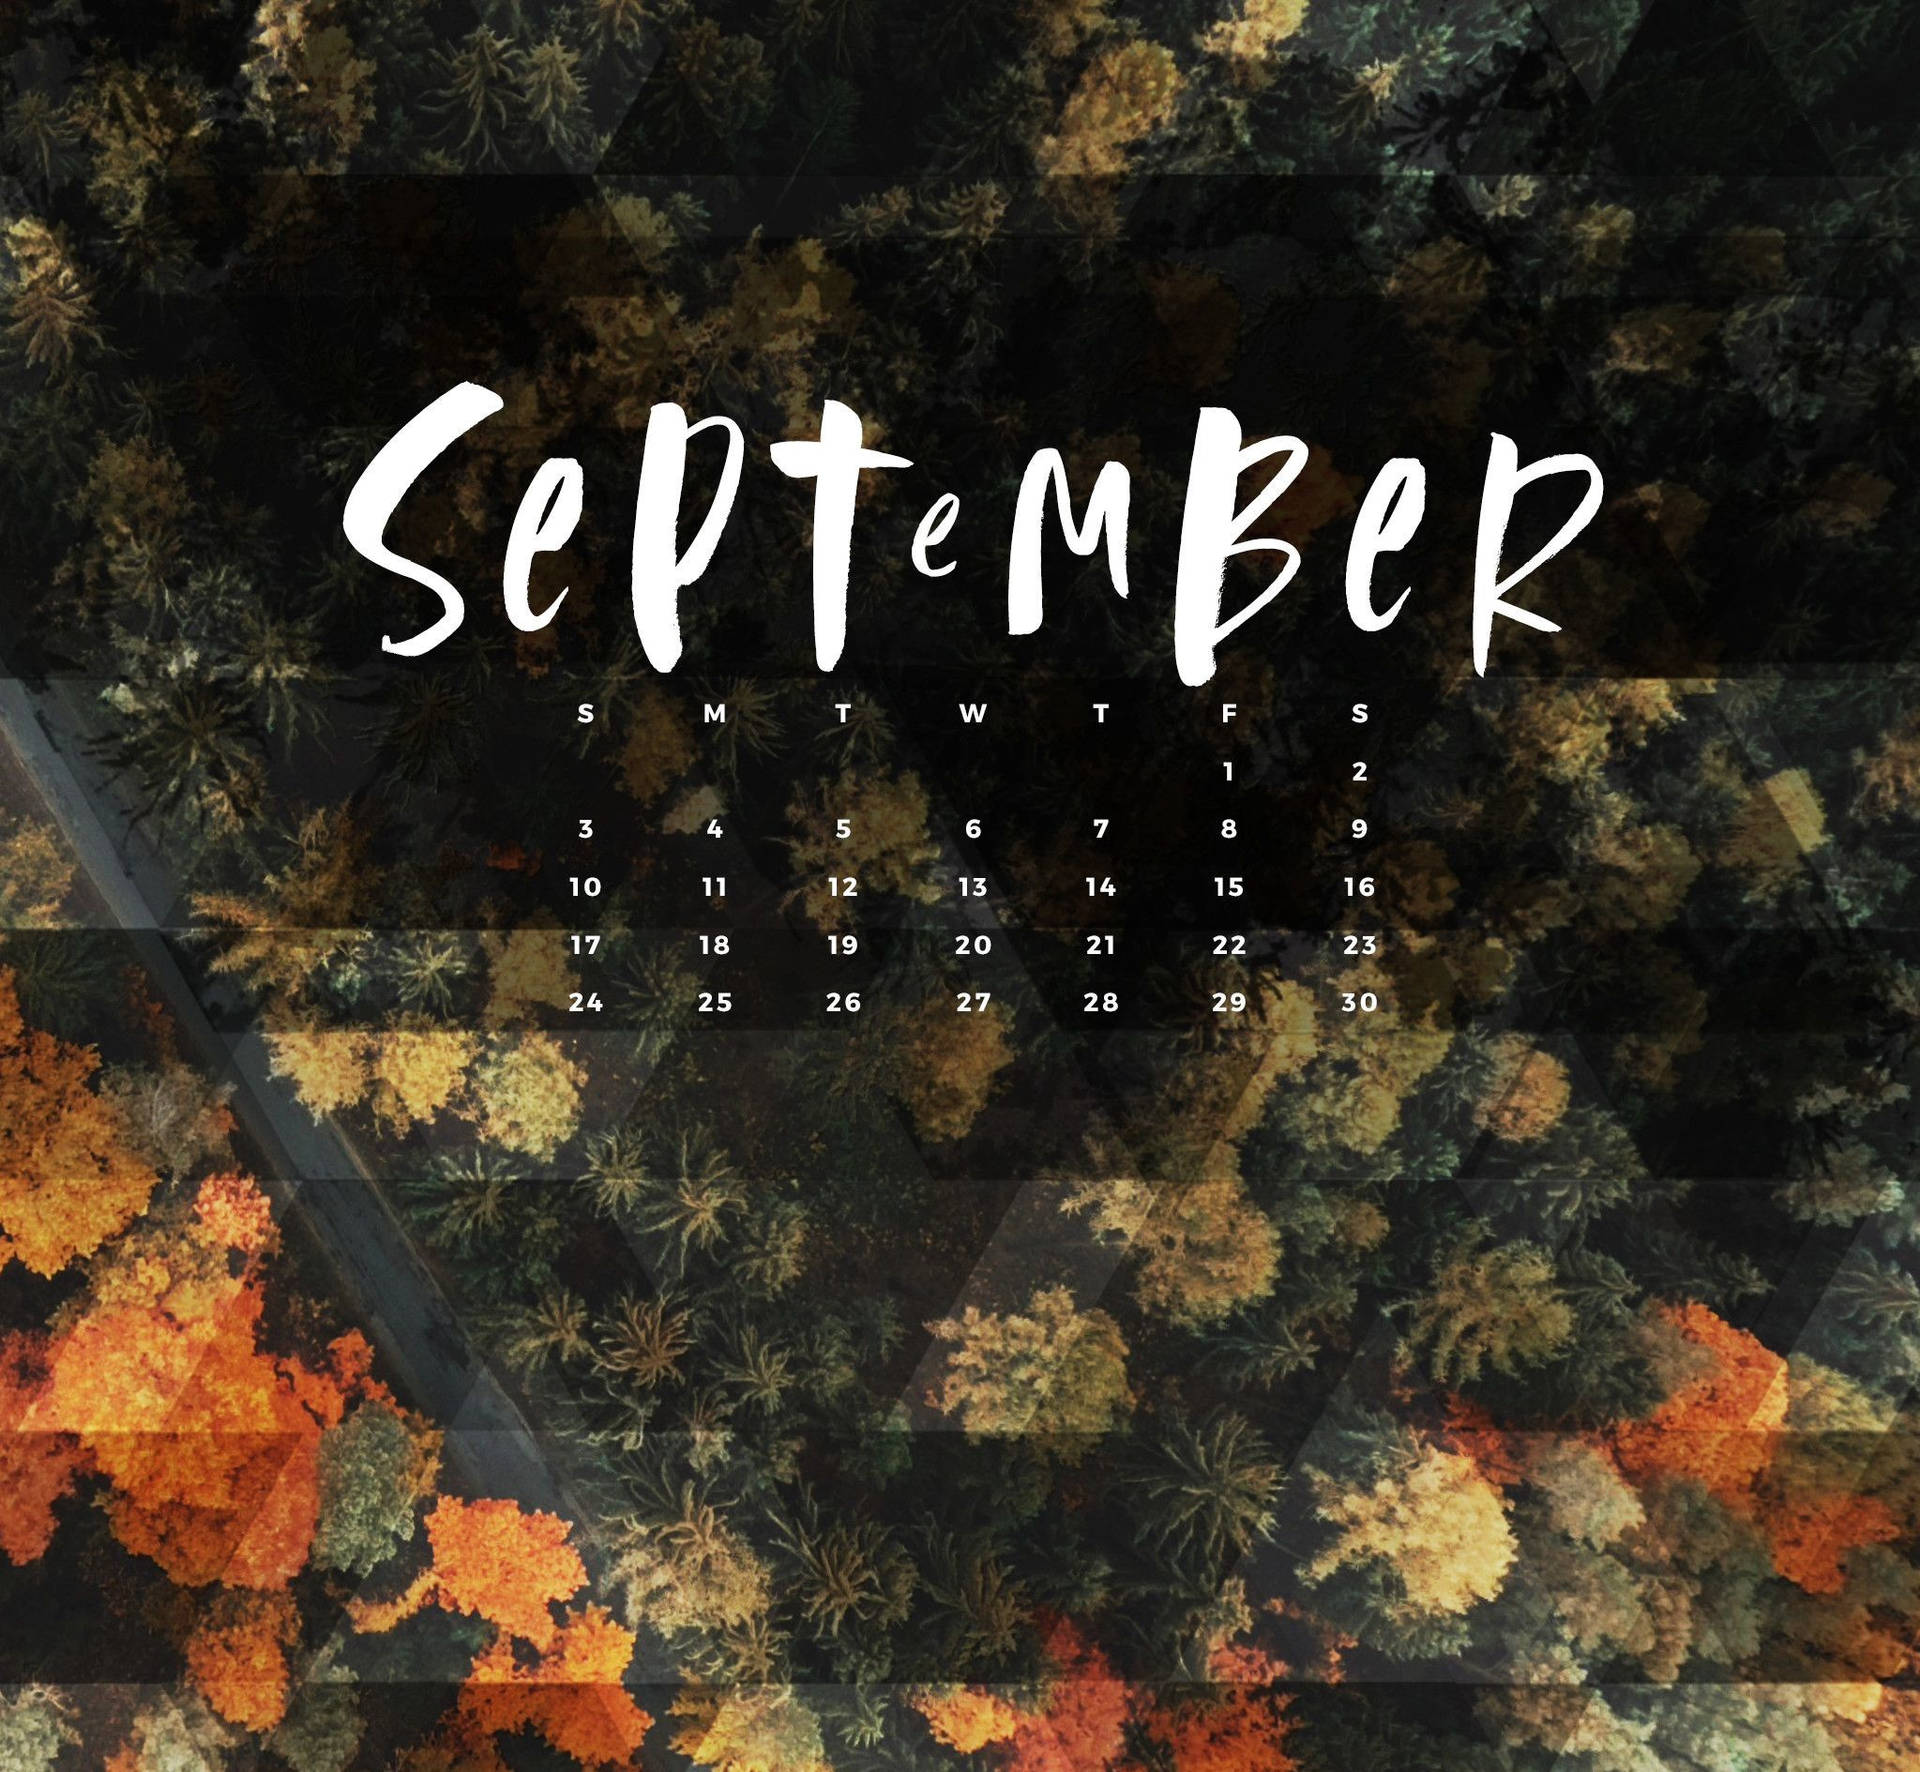 A Calendar And Lush Trees To Mark The Beginning Of September.